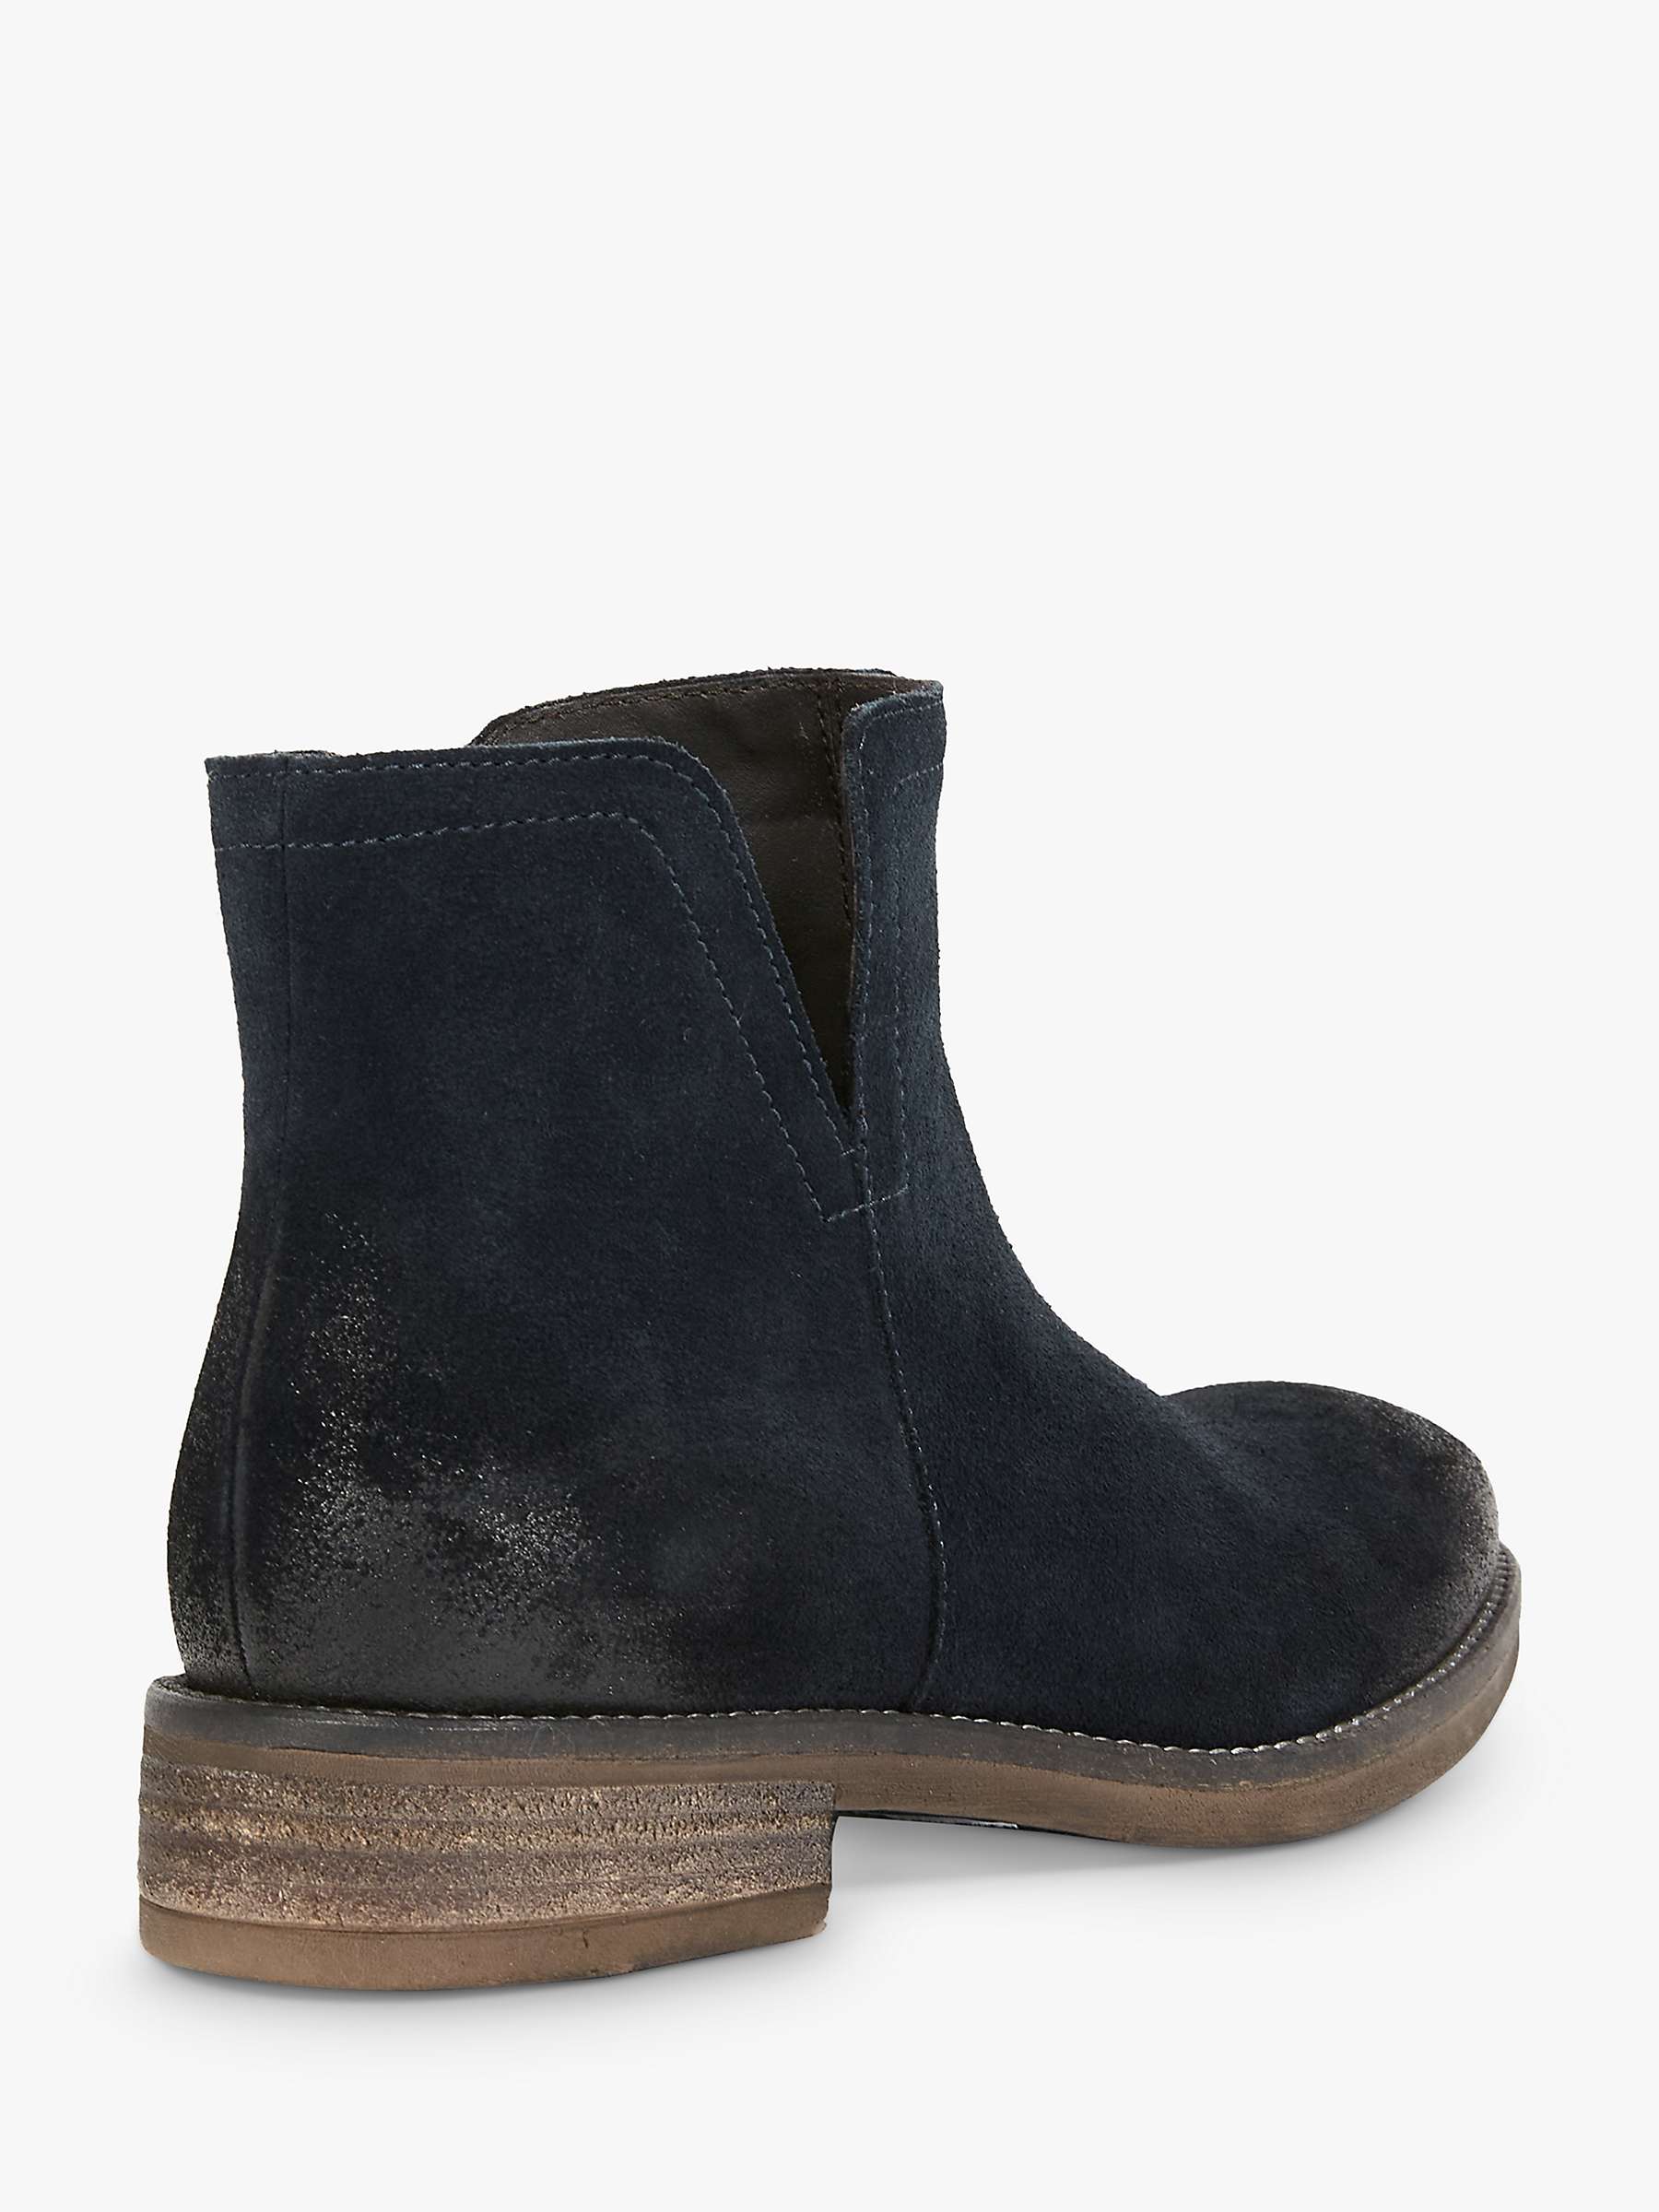 Buy Celtic & Co. Suede Notched Ankle Boots, Navy Online at johnlewis.com